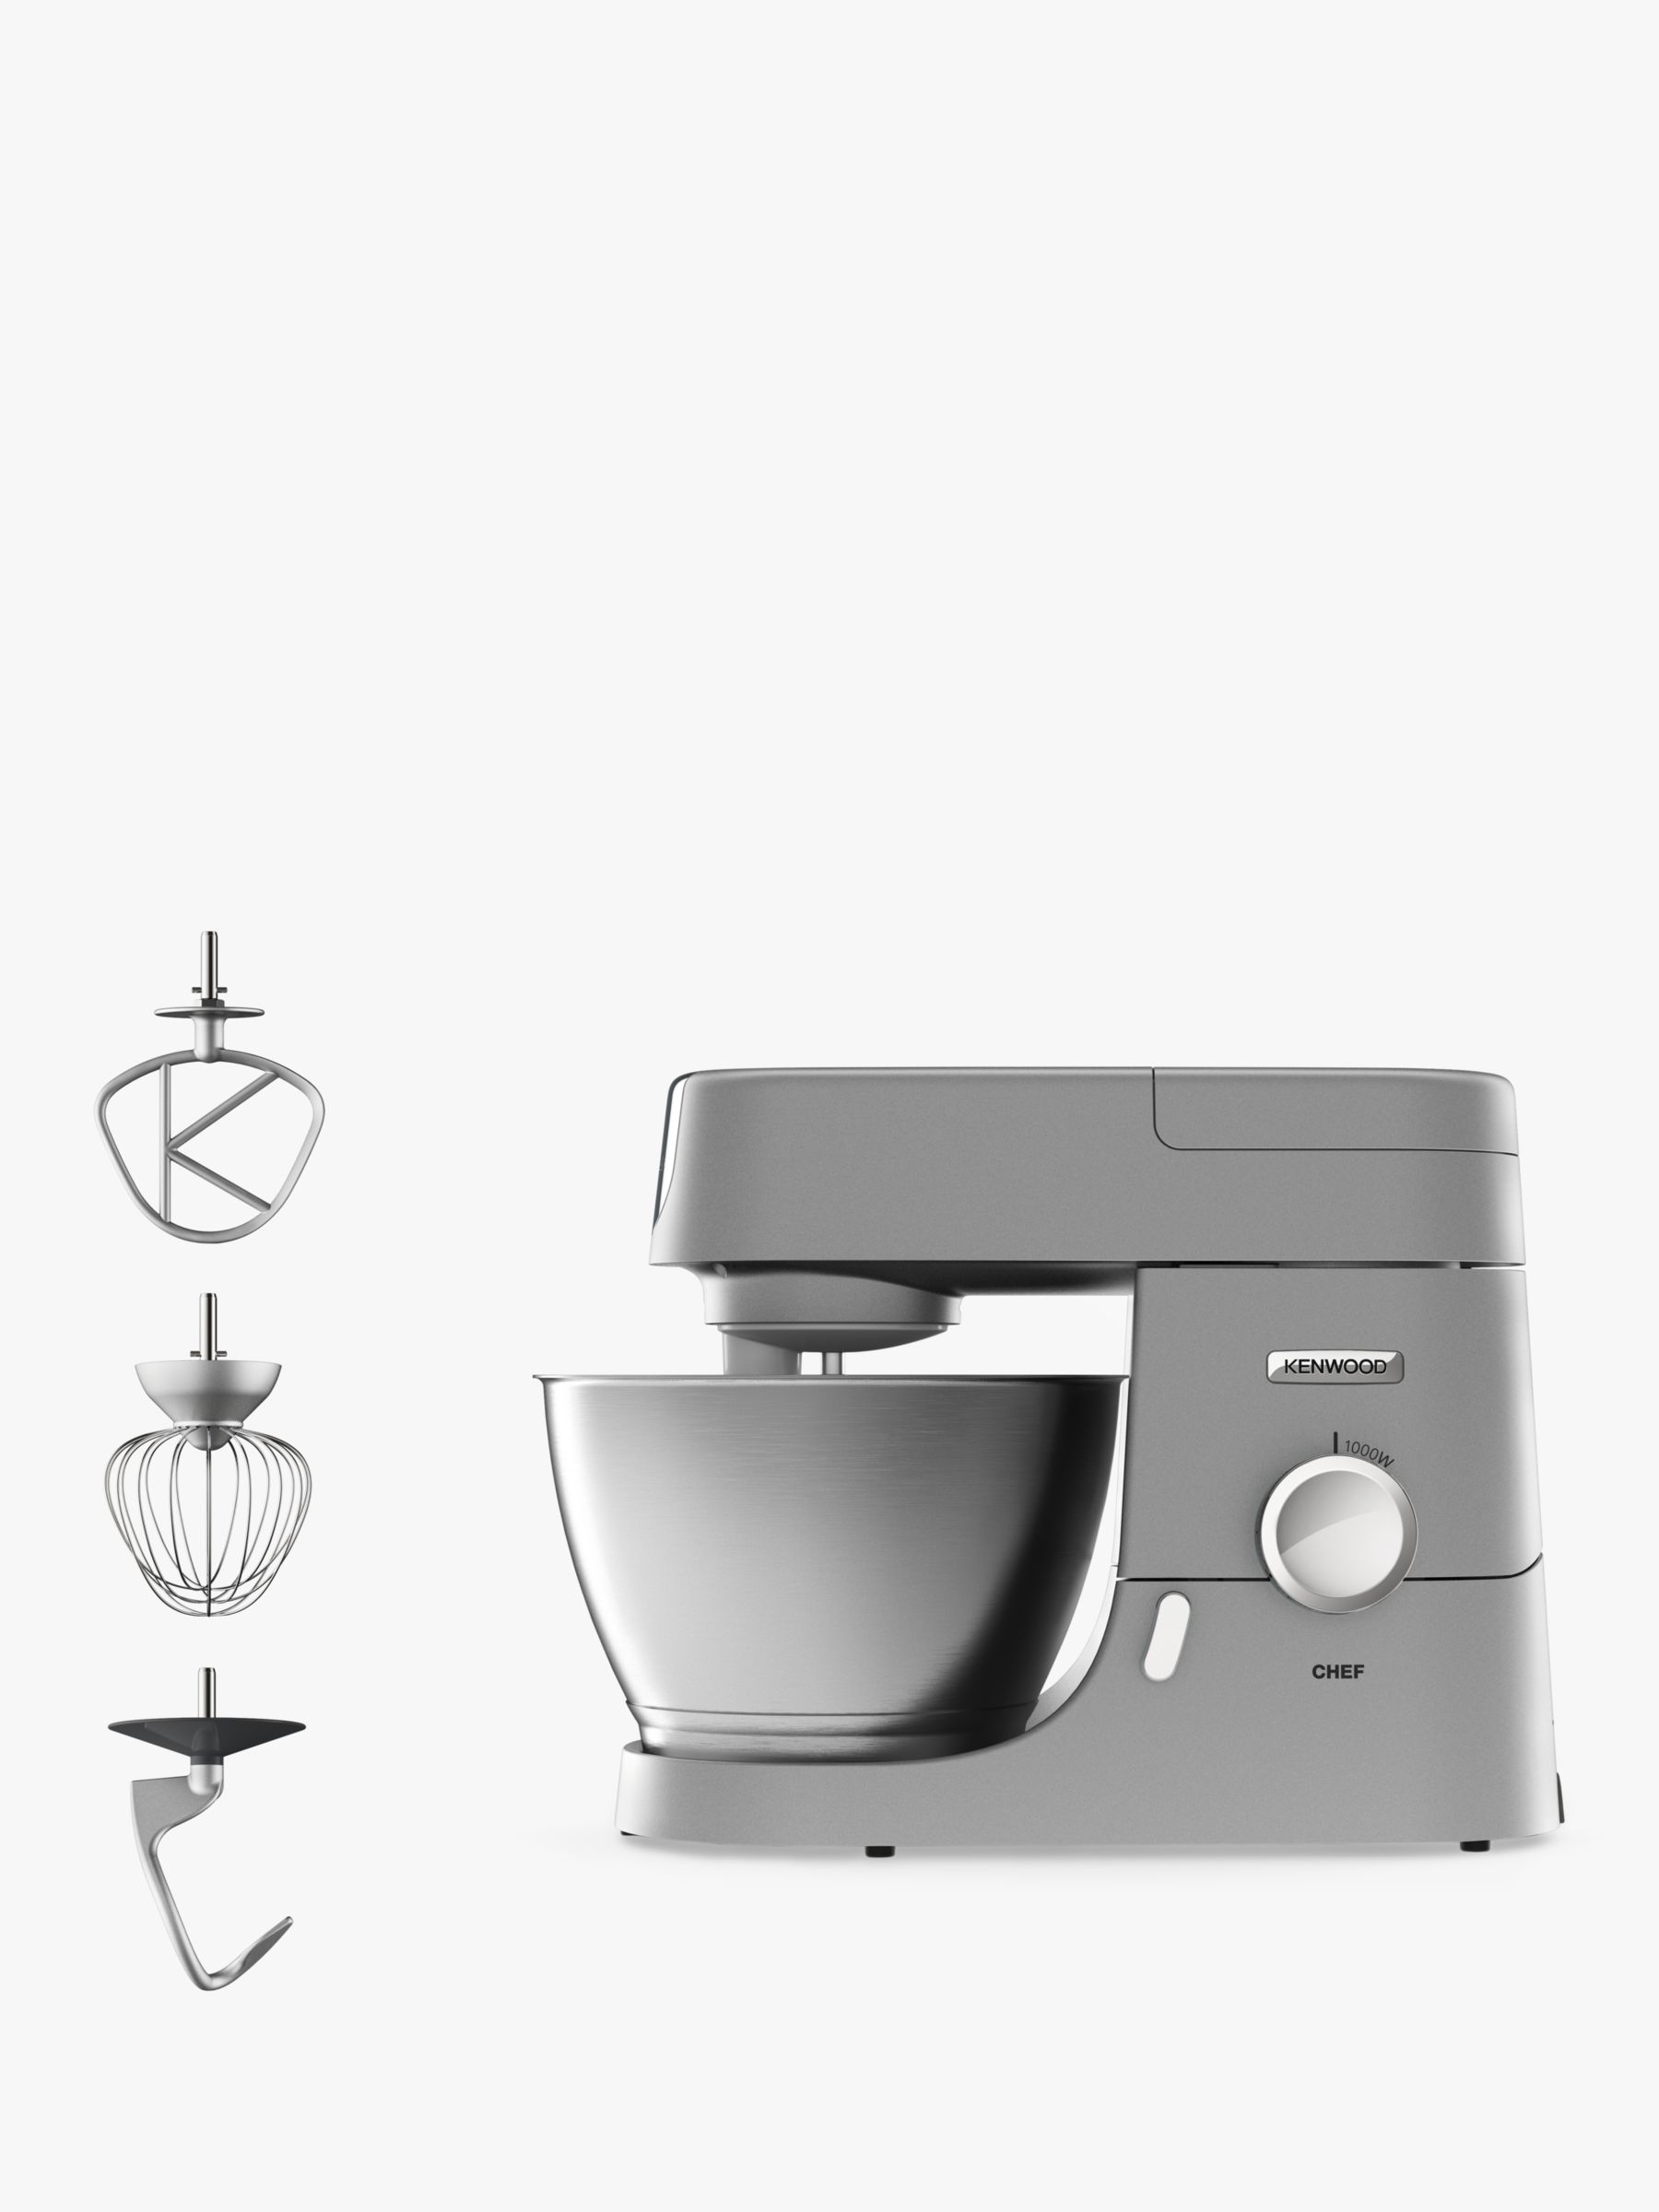 Kenwood KVC3100S Chef Stand Mixer, Silver